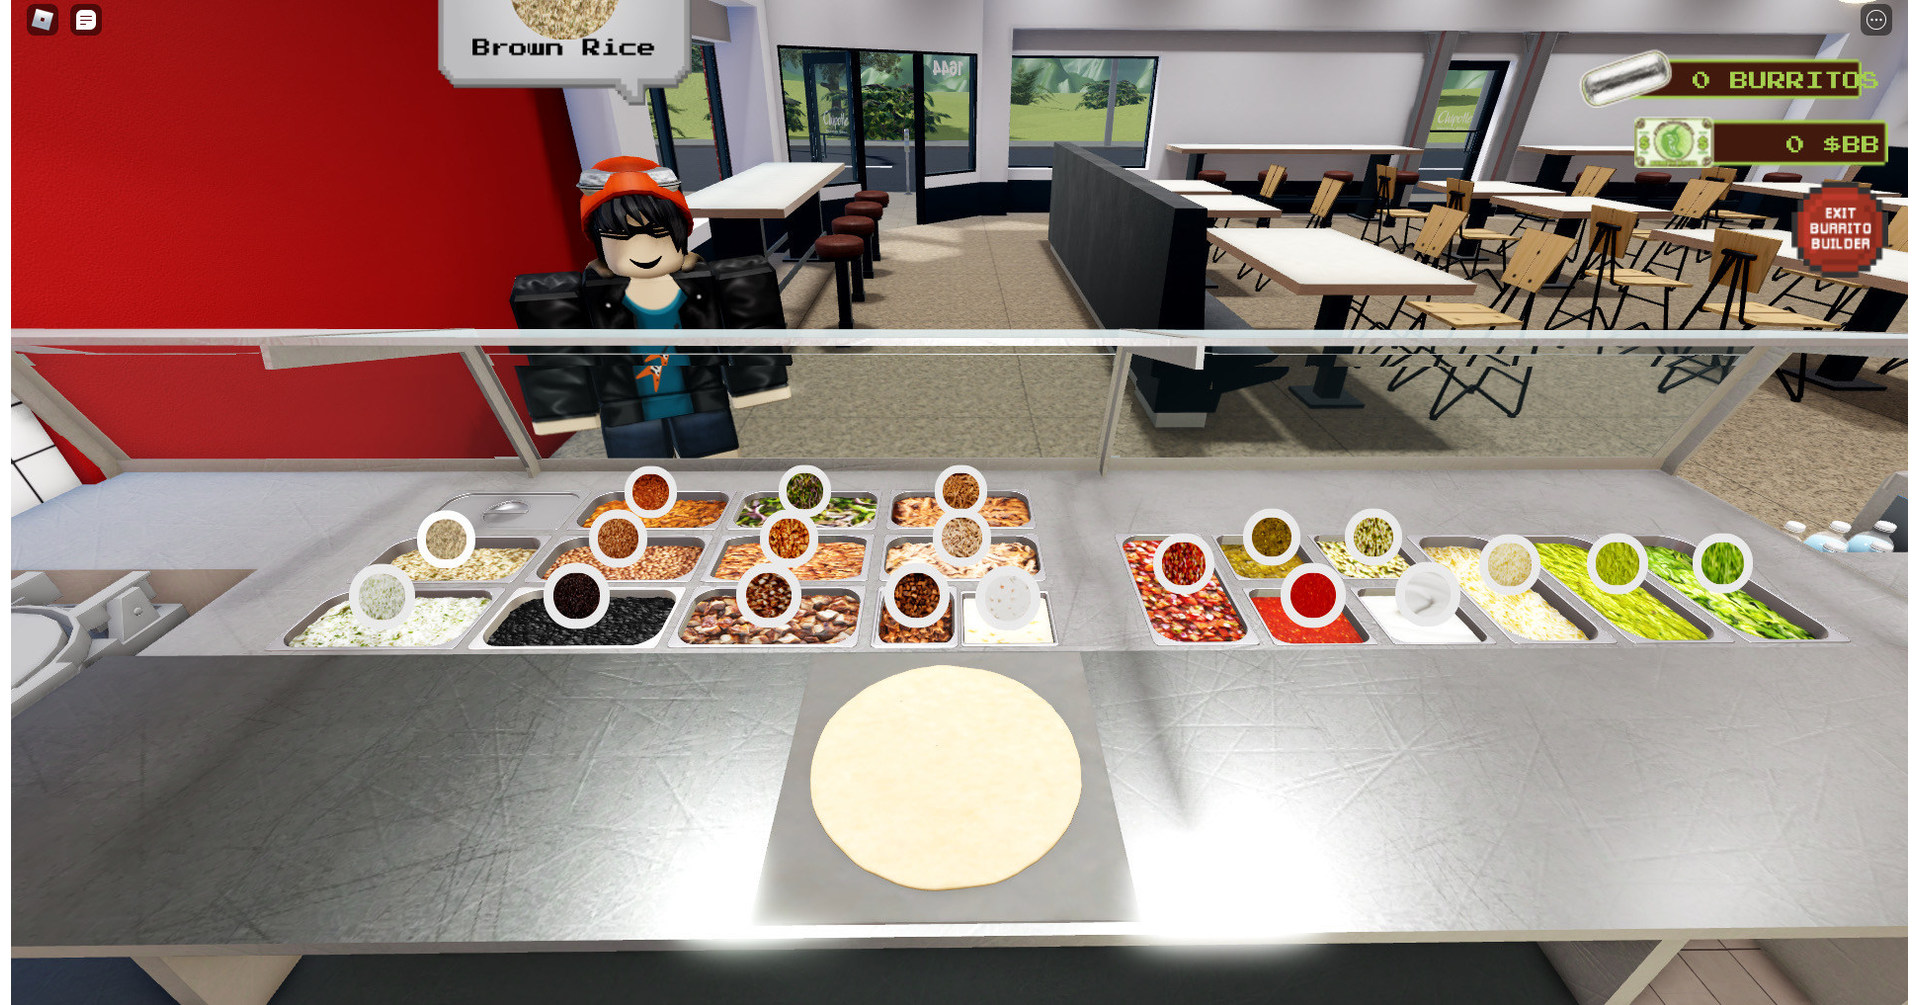 New World Notes: Chipotle's Burrito Giveaway in ROBLOX Attracts 5 Million+  Extra Visits -- RoMonitor Stats